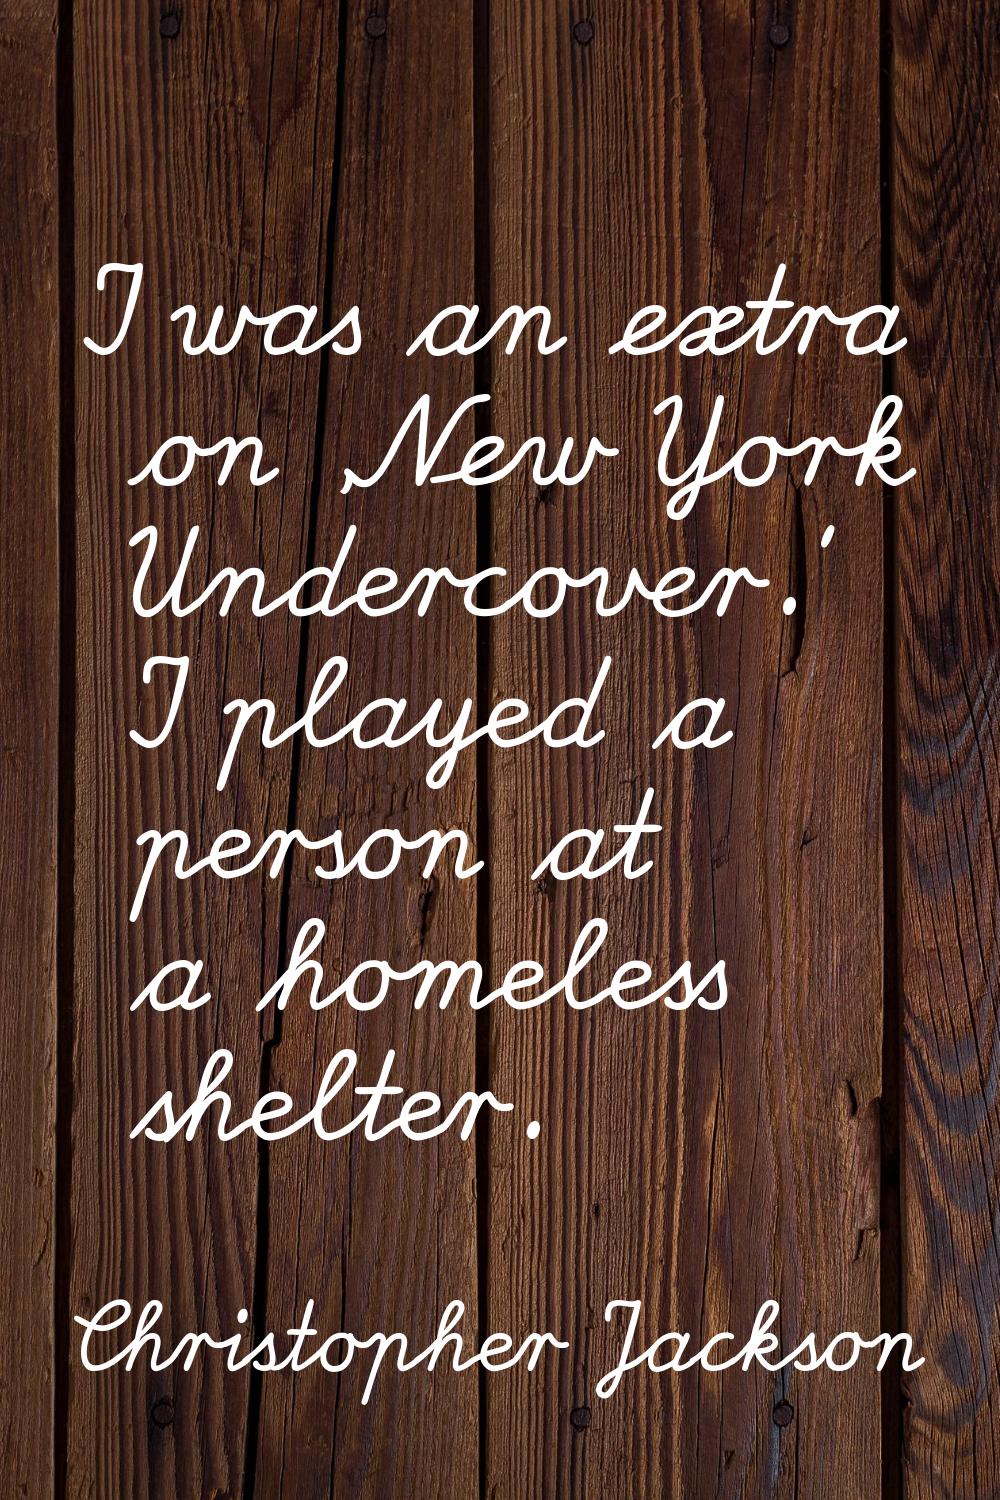 I was an extra on 'New York Undercover.' I played a person at a homeless shelter.